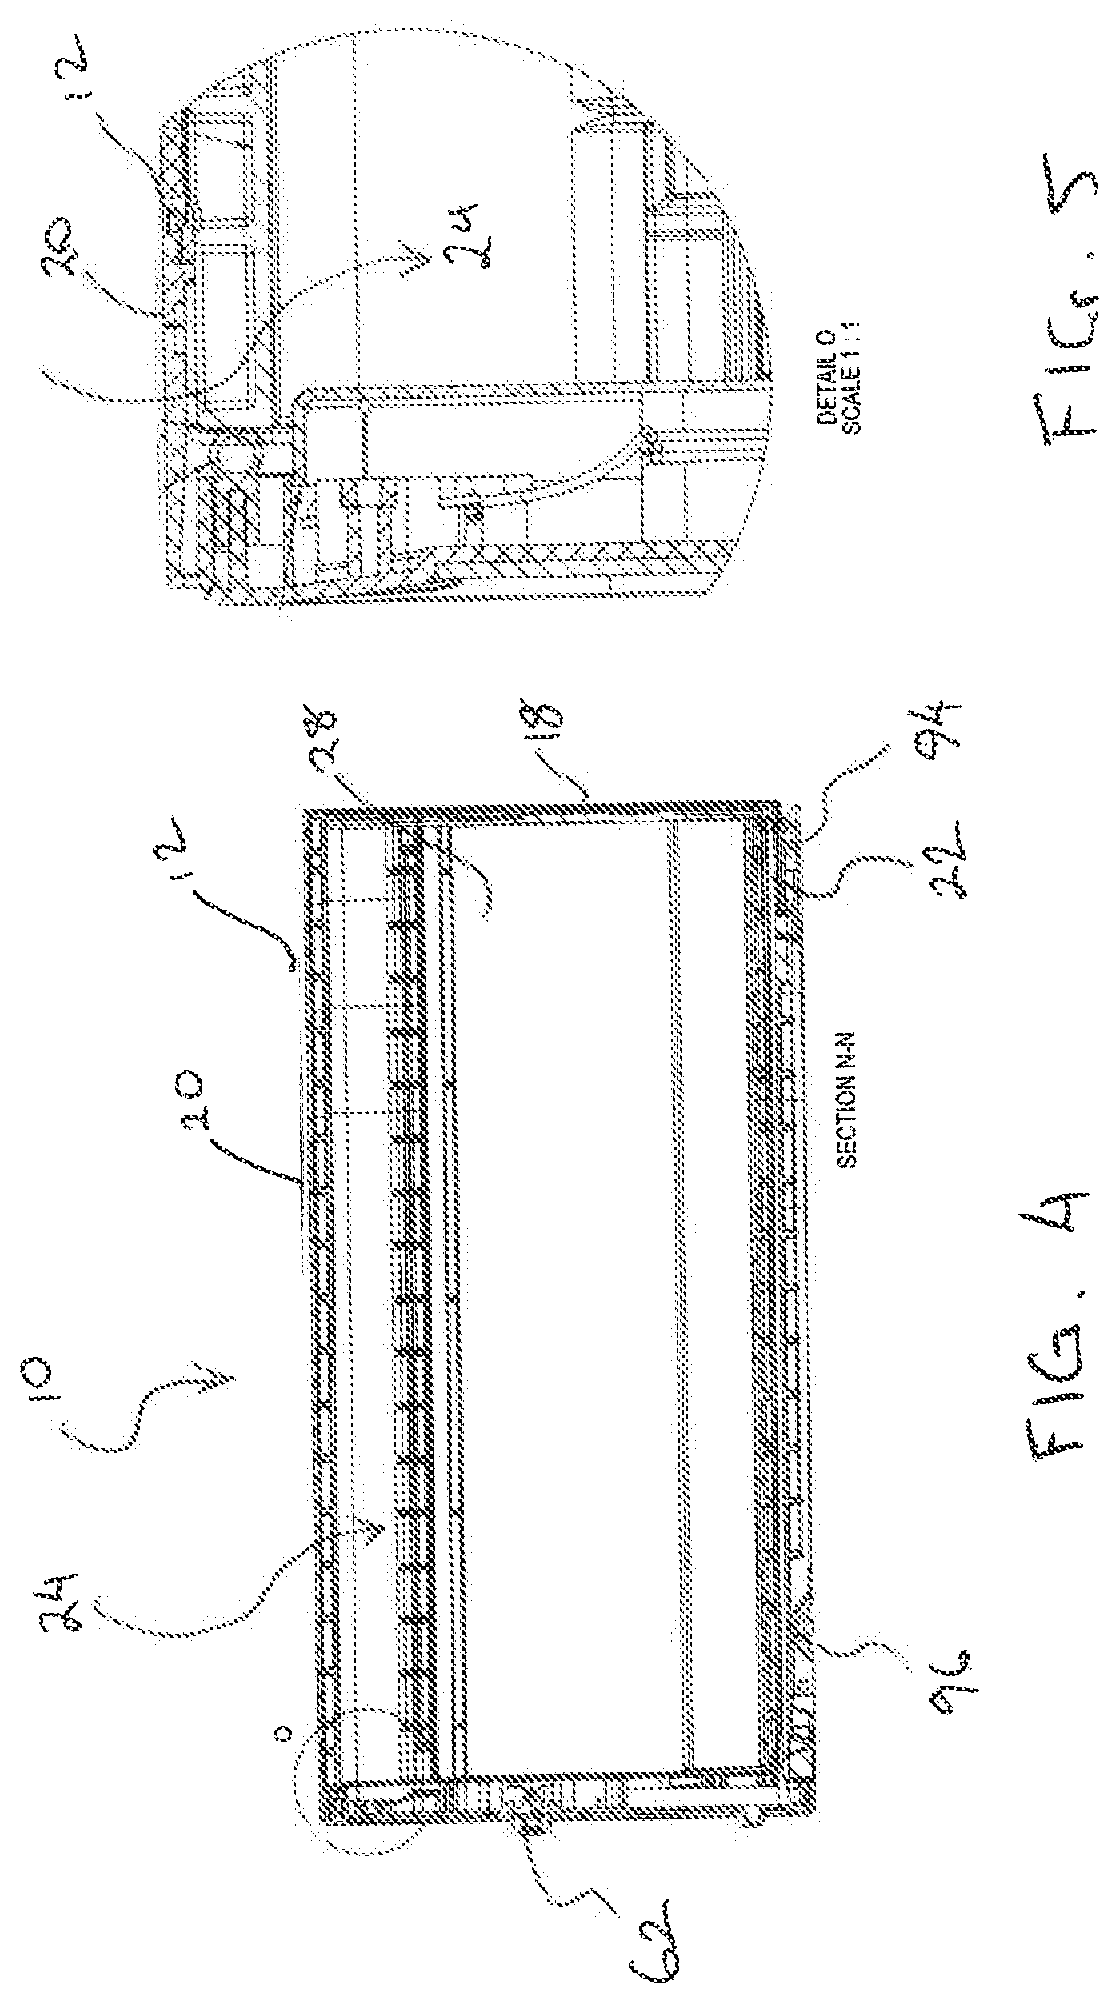 Storage system suitable for installation in or on a vehicle